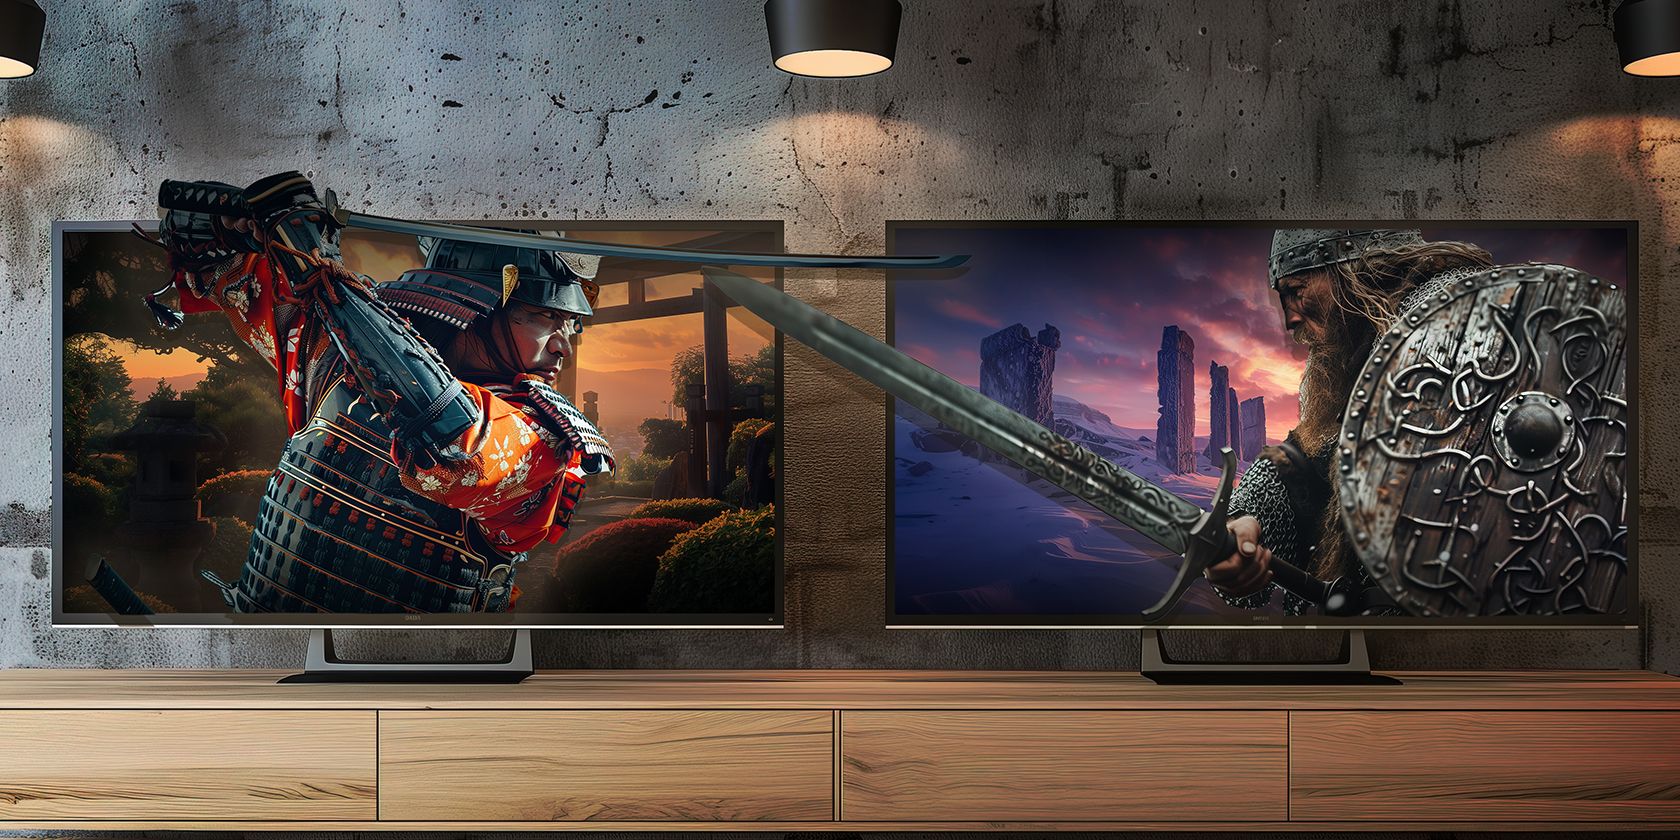 two warriors battle across two different televisions side by side